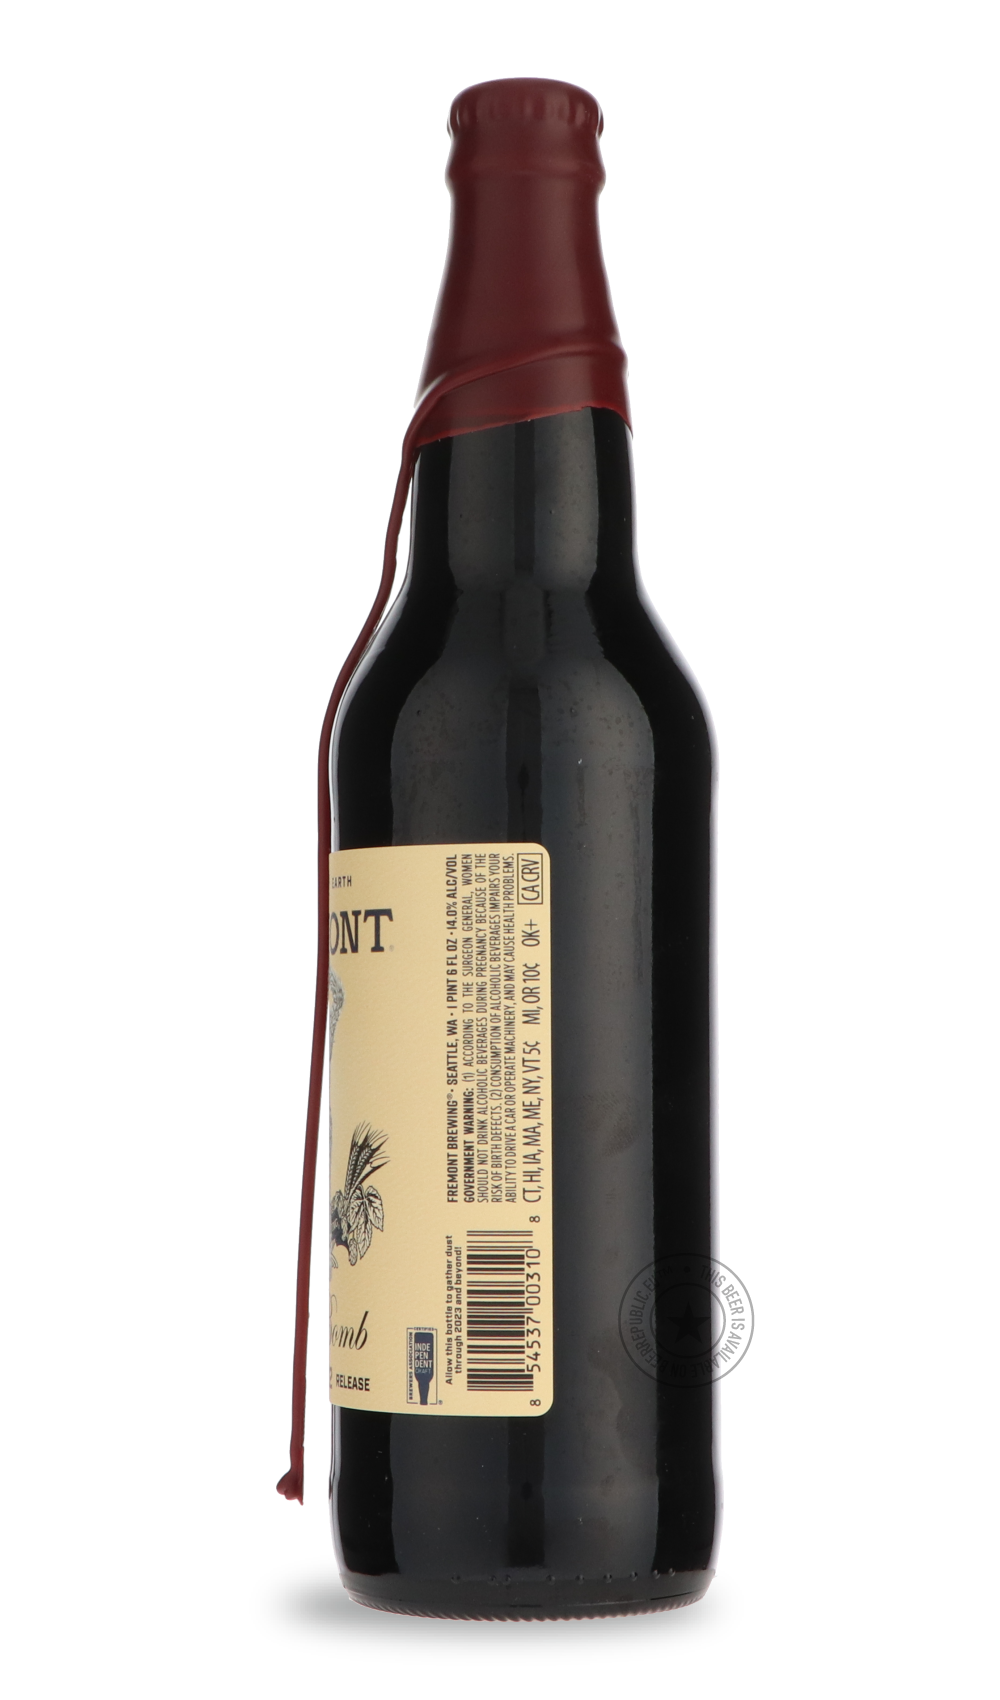 -Fremont- B-Bomb 2022-Brown & Dark- Only @ Beer Republic - The best online beer store for American & Canadian craft beer - Buy beer online from the USA and Canada - Bier online kopen - Amerikaans bier kopen - Craft beer store - Craft beer kopen - Amerikanisch bier kaufen - Bier online kaufen - Acheter biere online - IPA - Stout - Porter - New England IPA - Hazy IPA - Imperial Stout - Barrel Aged - Barrel Aged Imperial Stout - Brown - Dark beer - Blond - Blonde - Pilsner - Lager - Wheat - Weizen - Amber - Ba